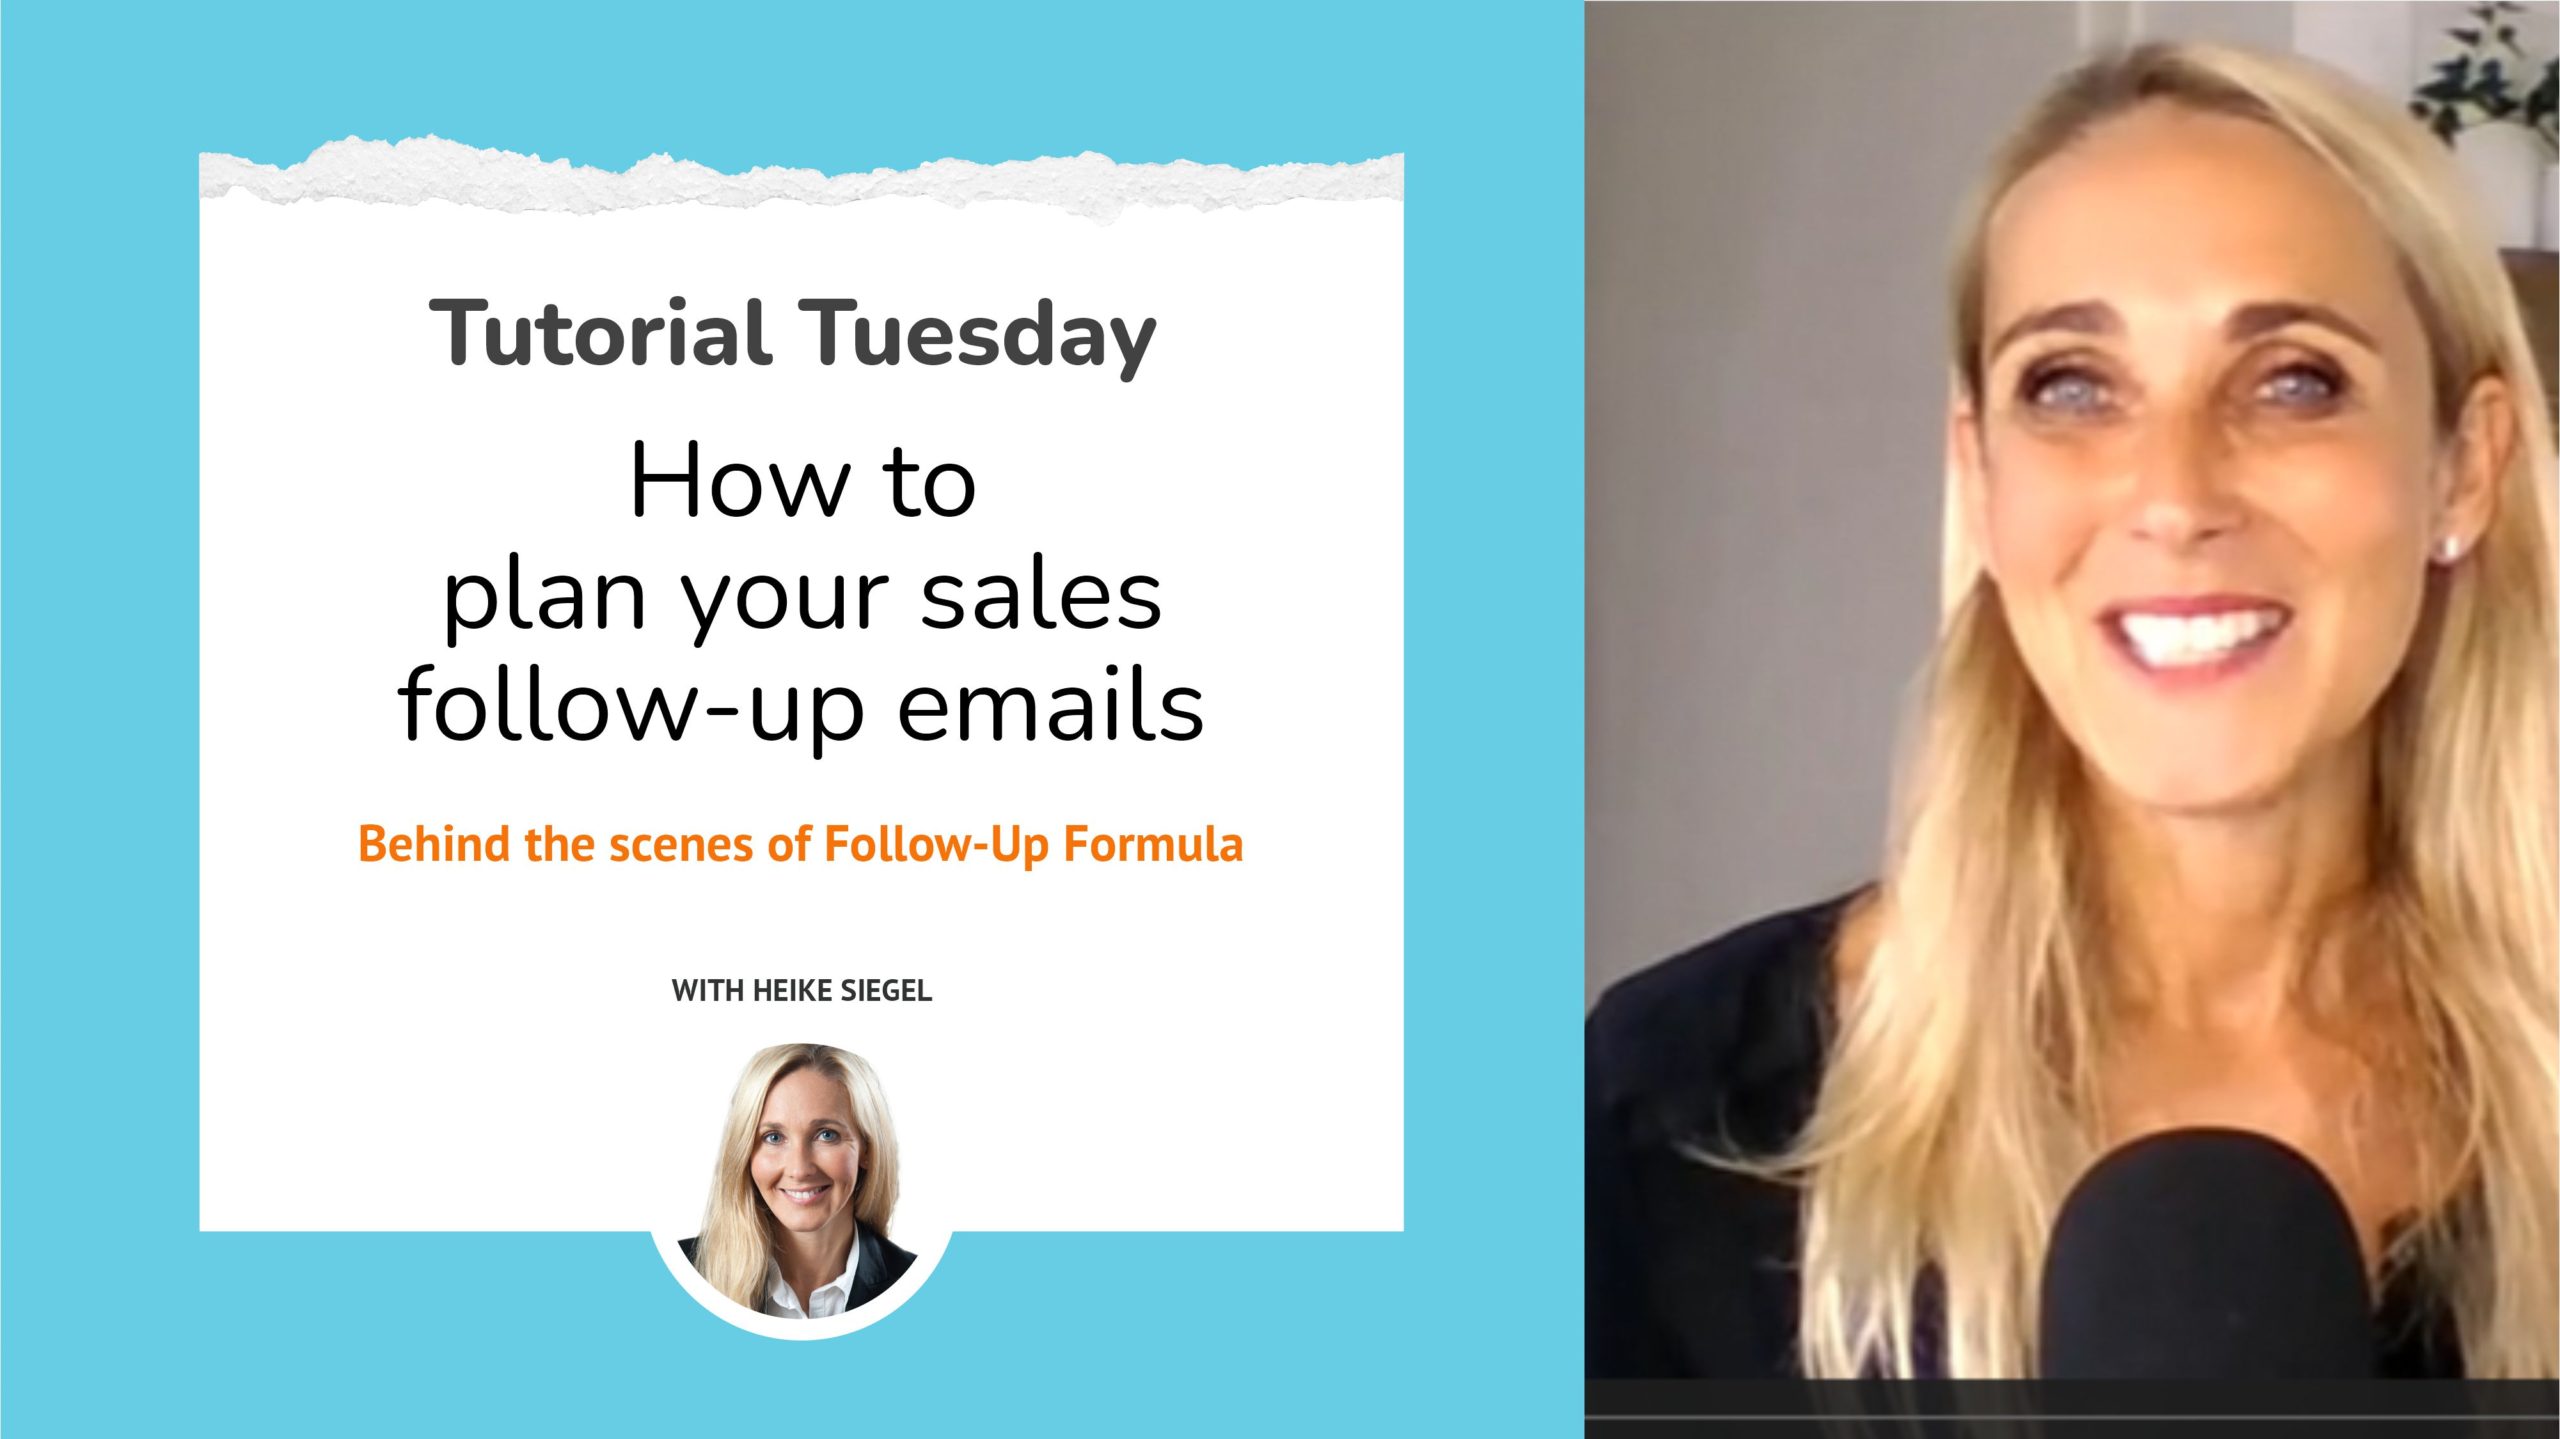 How to plan your sales follow-up emails